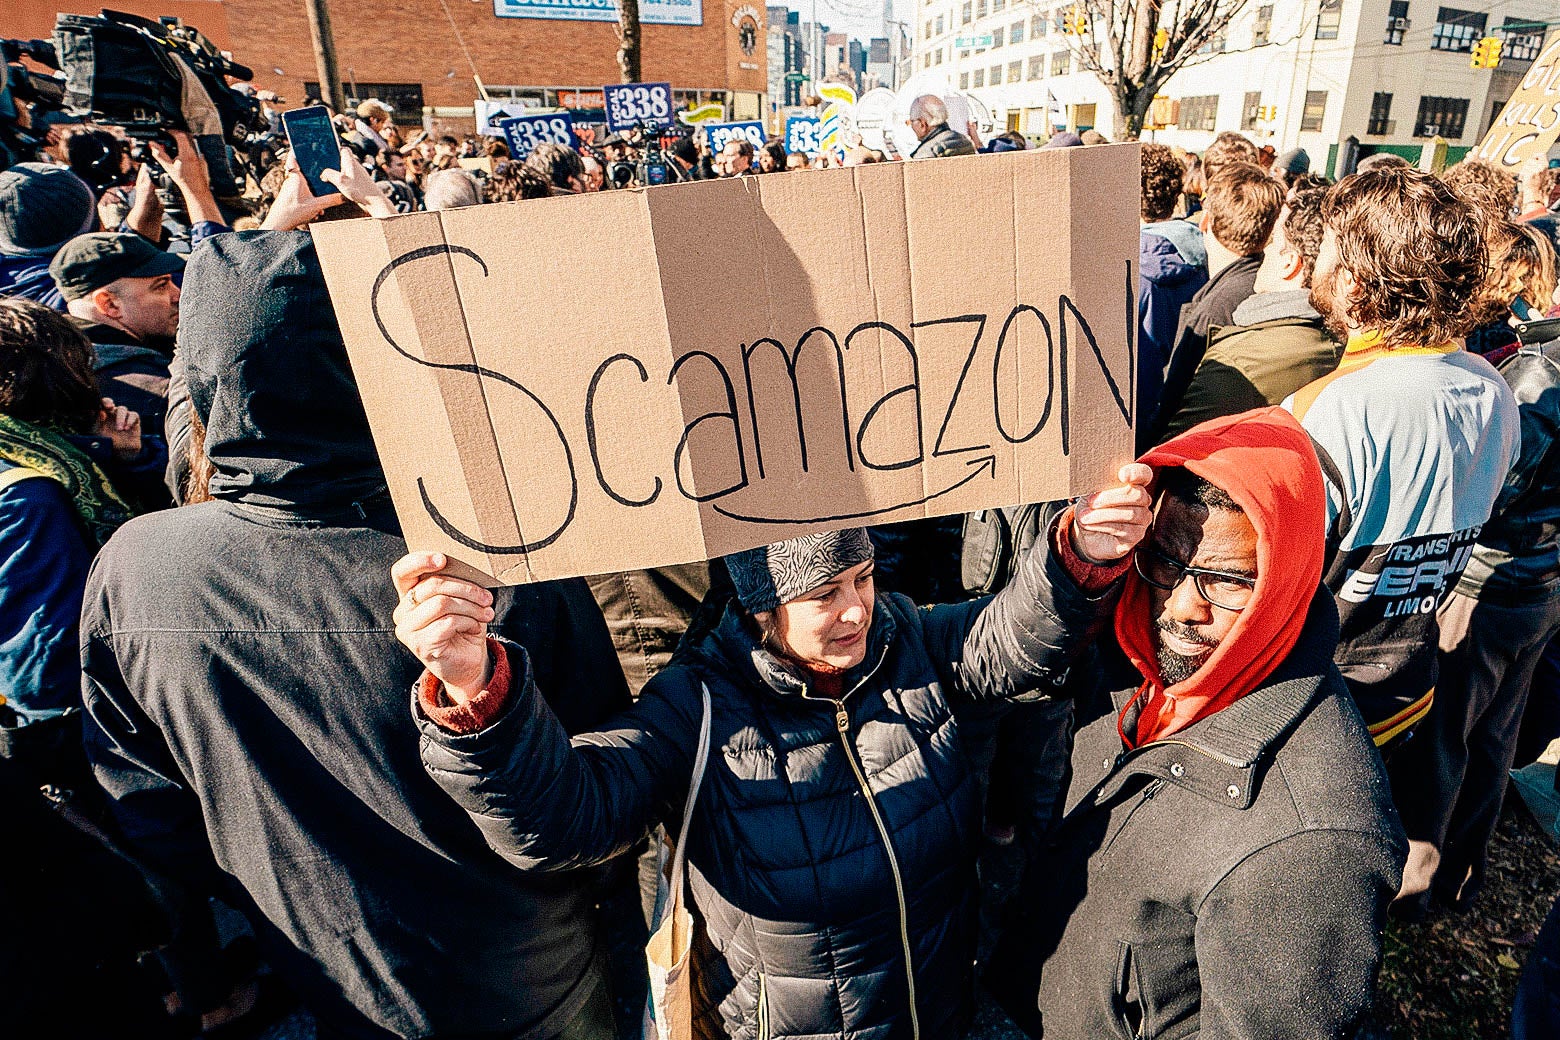 A crowd of anti-Amazon protesters, one holding a "Scamazon" sign.